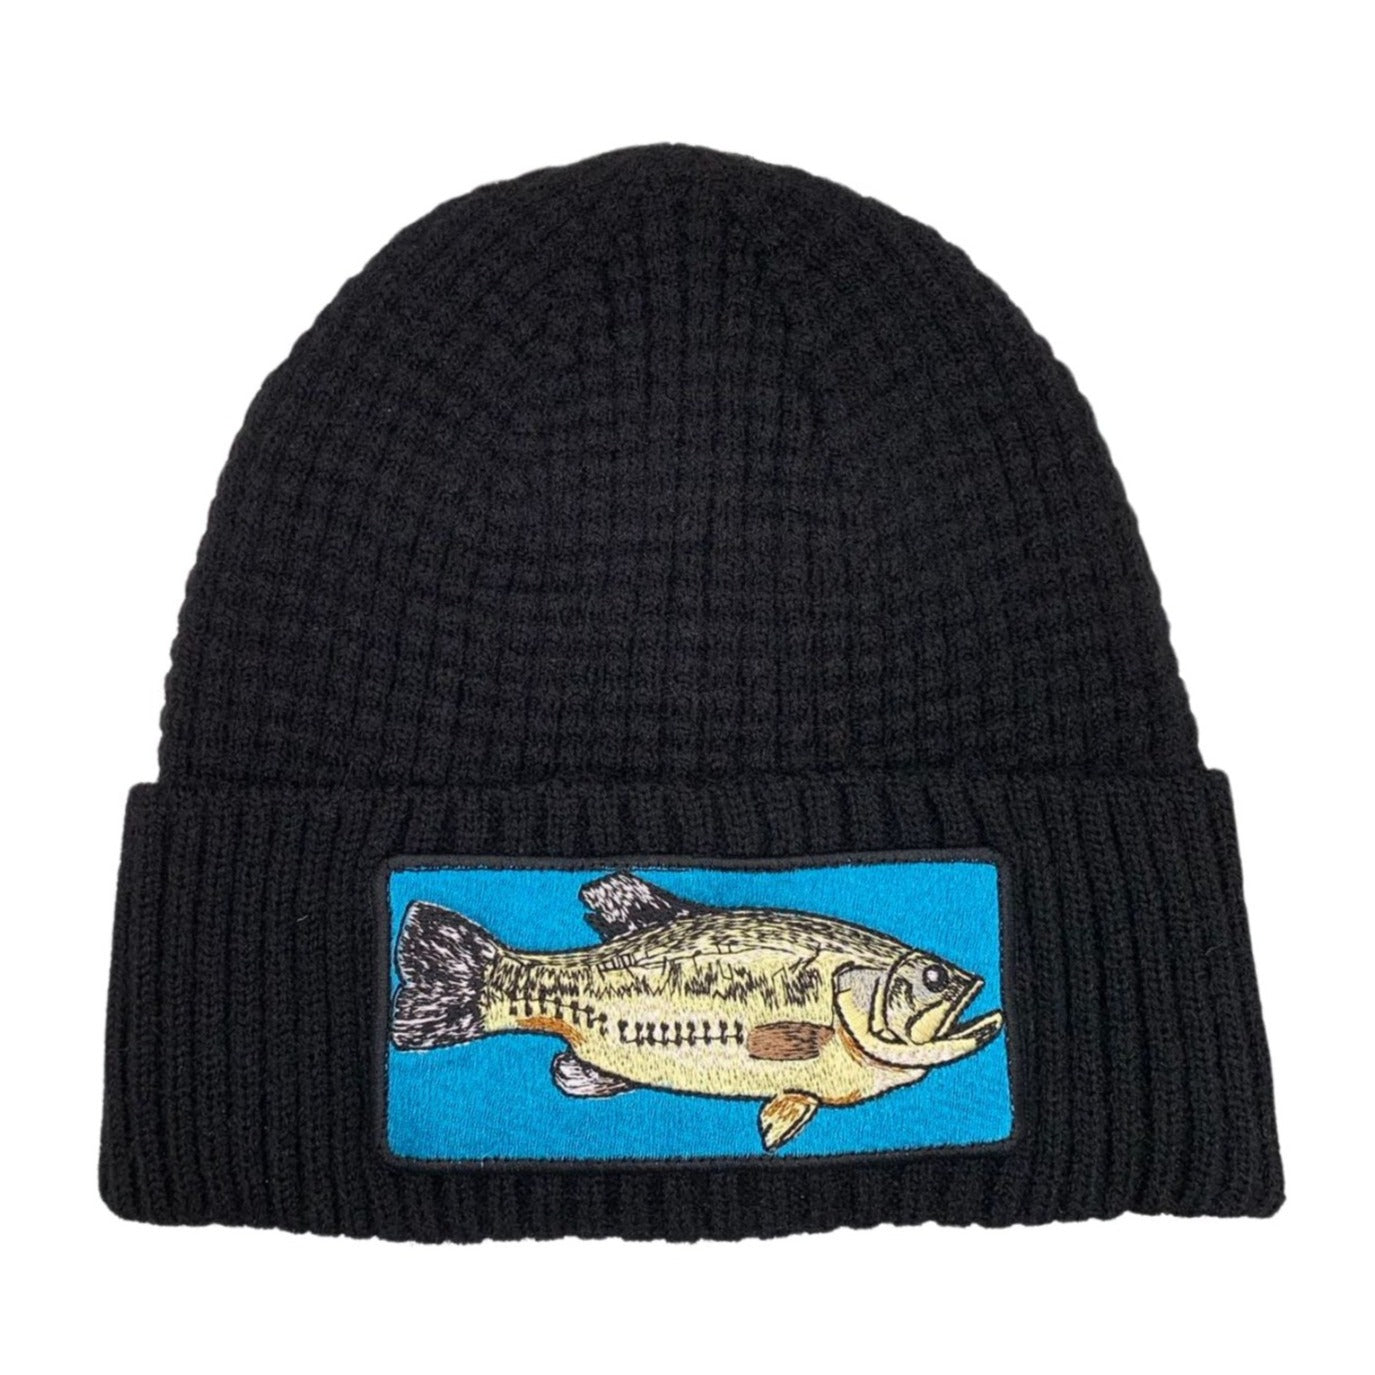 Hatphile Bass Embroidery Patch Fishman Fleece Lining Knit Hat Beanie Toque